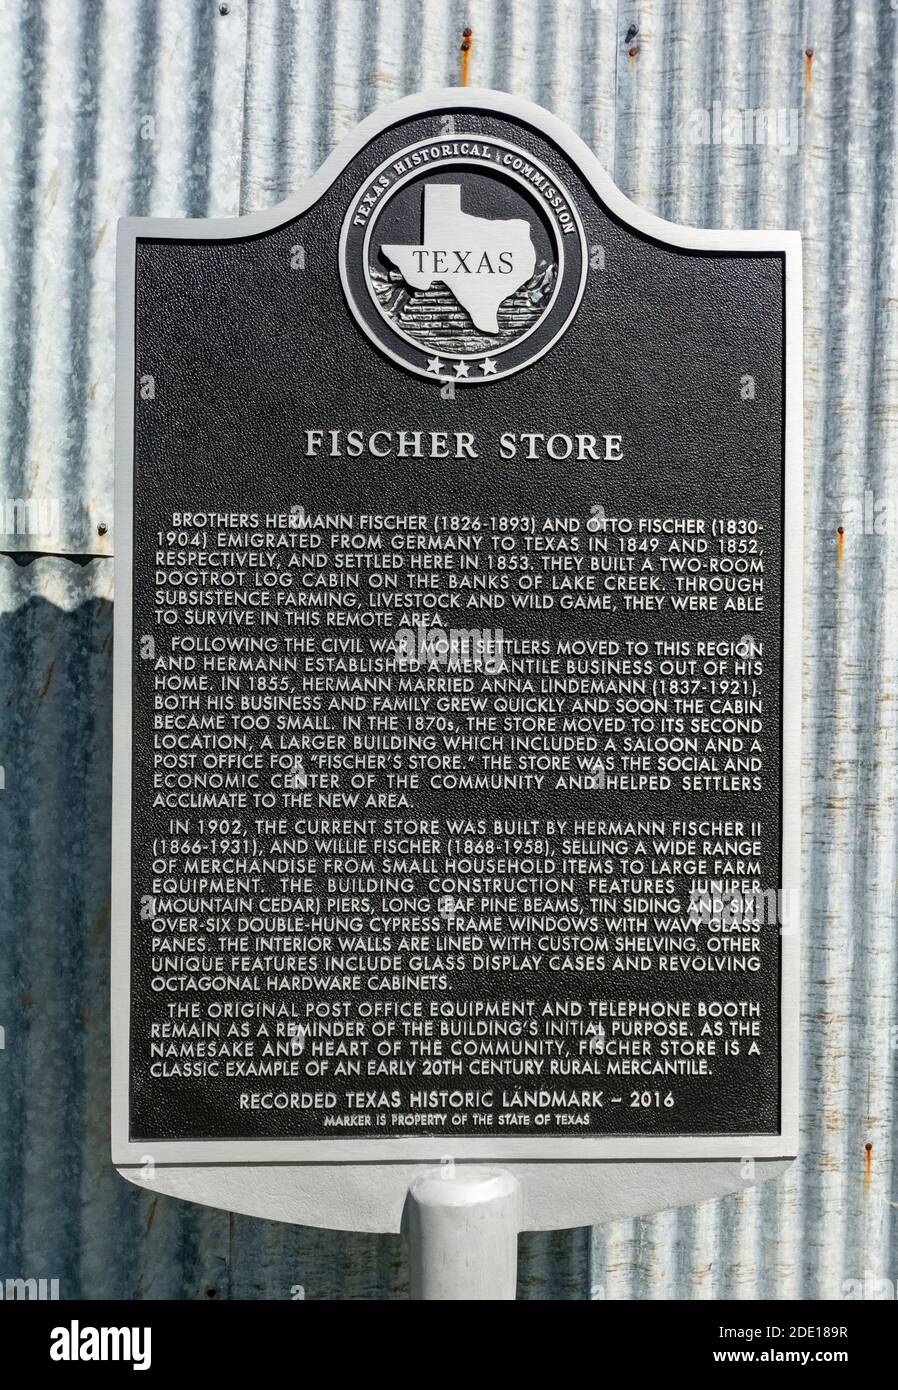 Texas, Comal County, Fischer Store built 1902, historical information sign Stock Photo